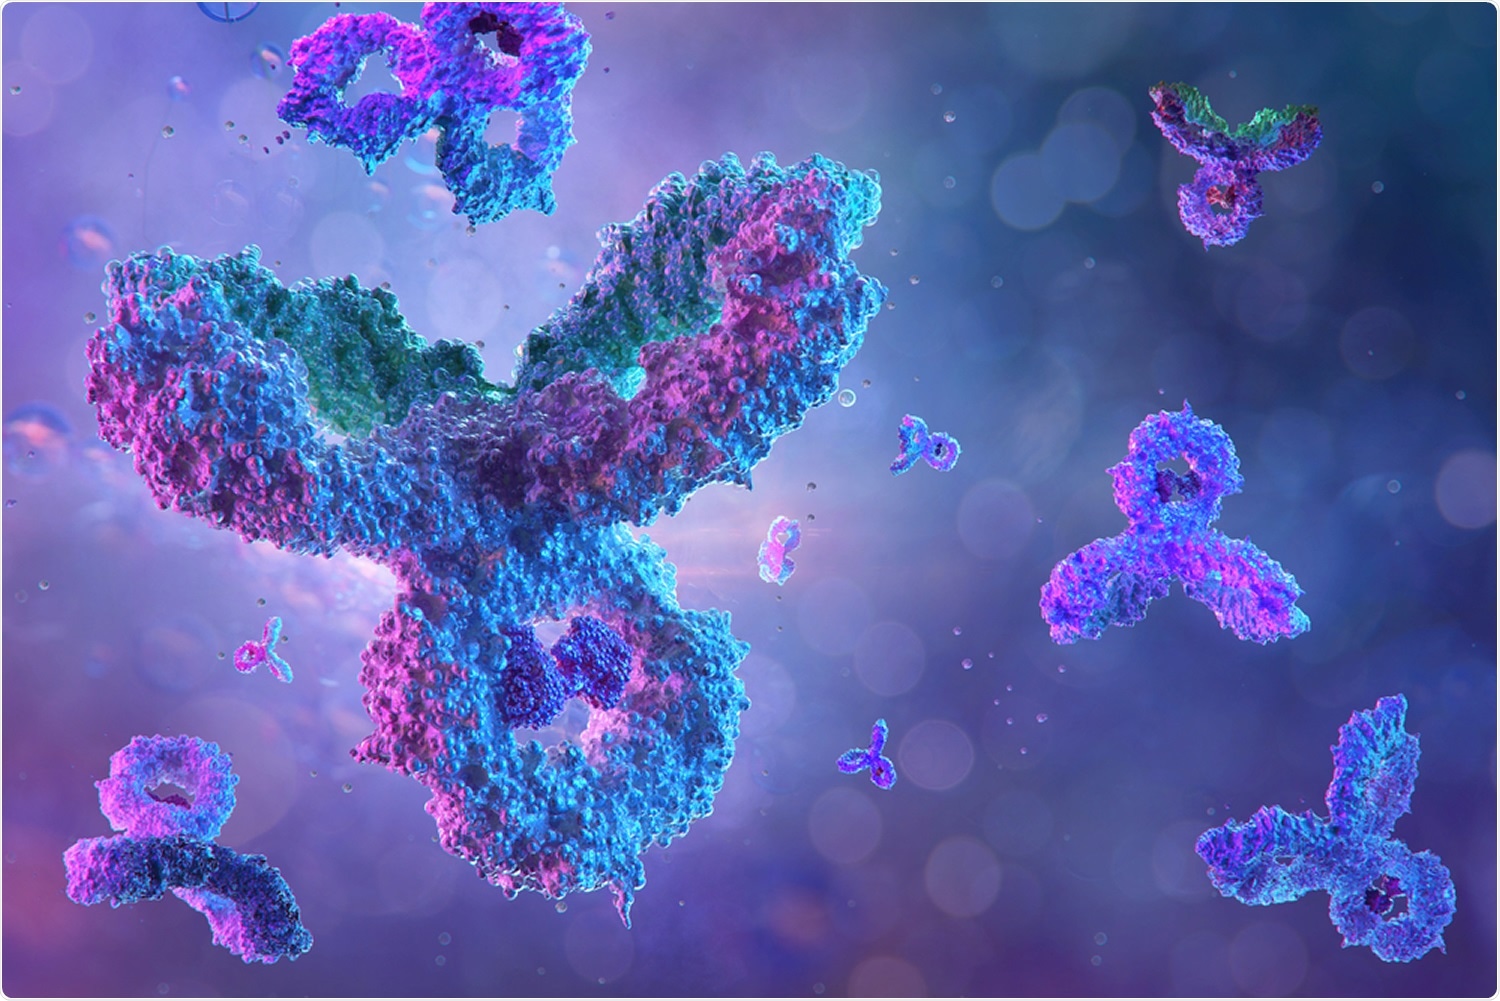 Study: Stable IgG-antibody levels in slightly infected patients with SARS-CoV-2. Image credit: Corona Borealis Studio/Shutterstock.